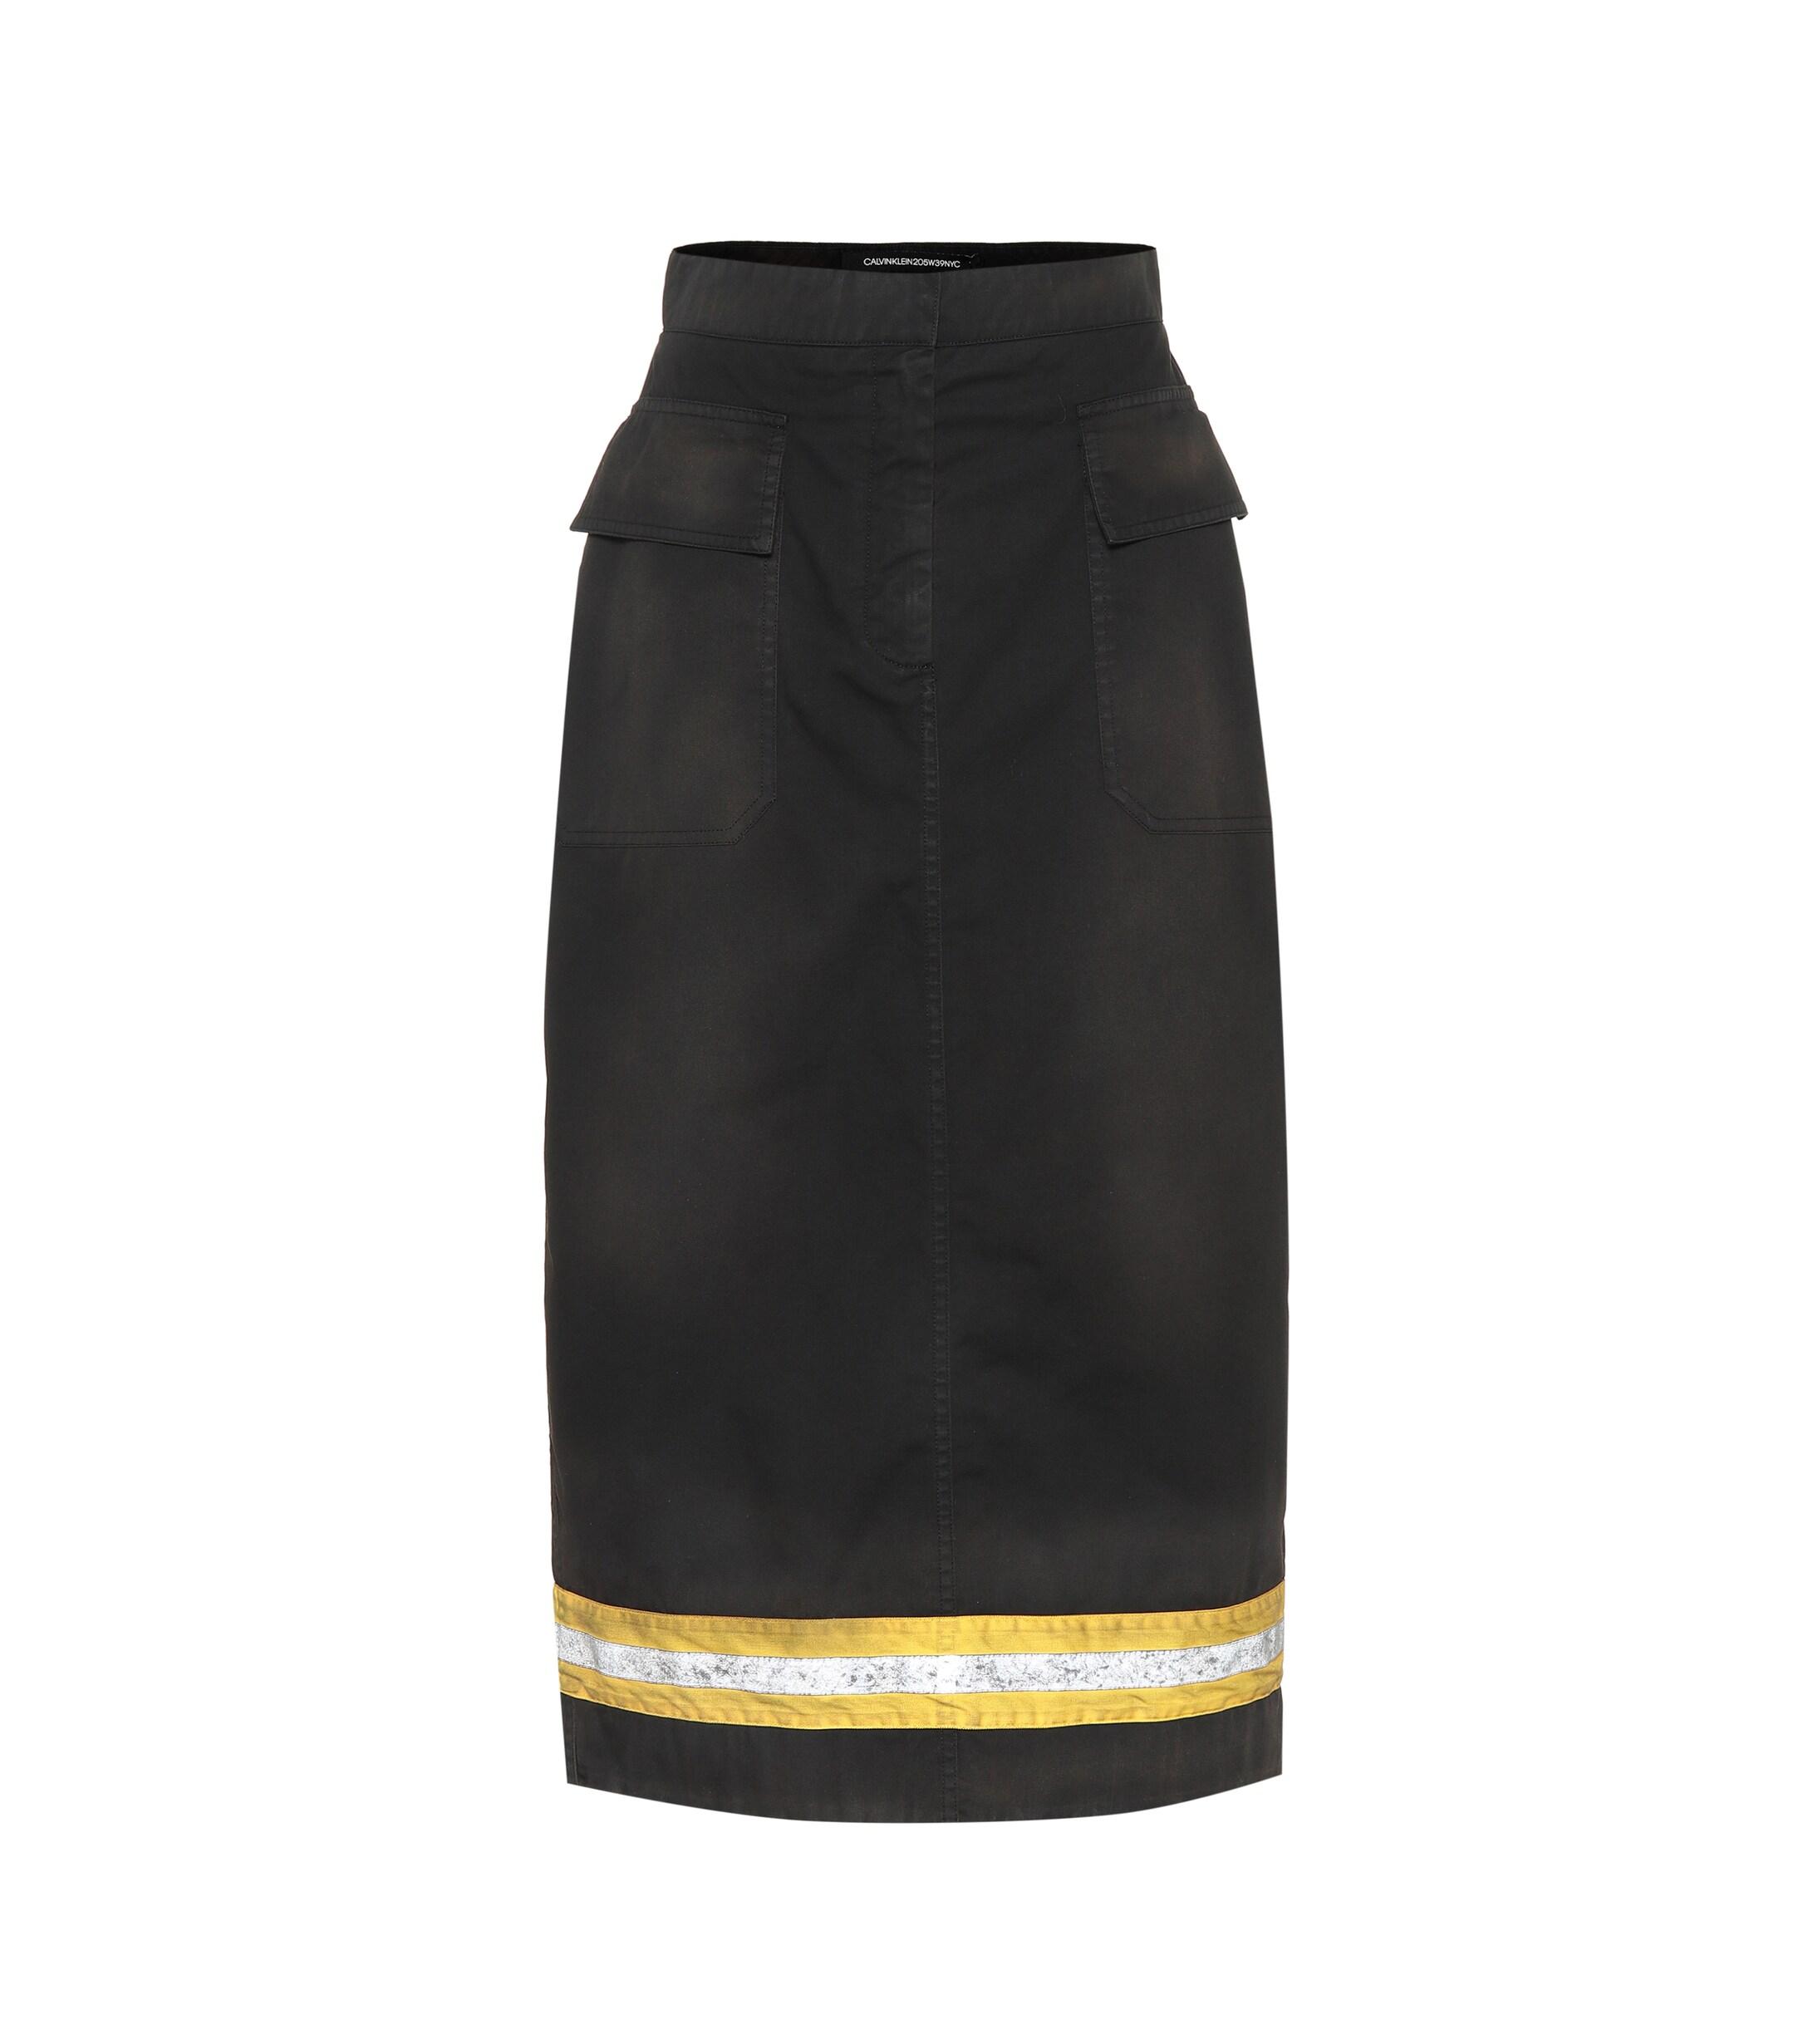 CALVIN KLEIN 205W39NYC Skirt With Reflective Band in Black - Save 